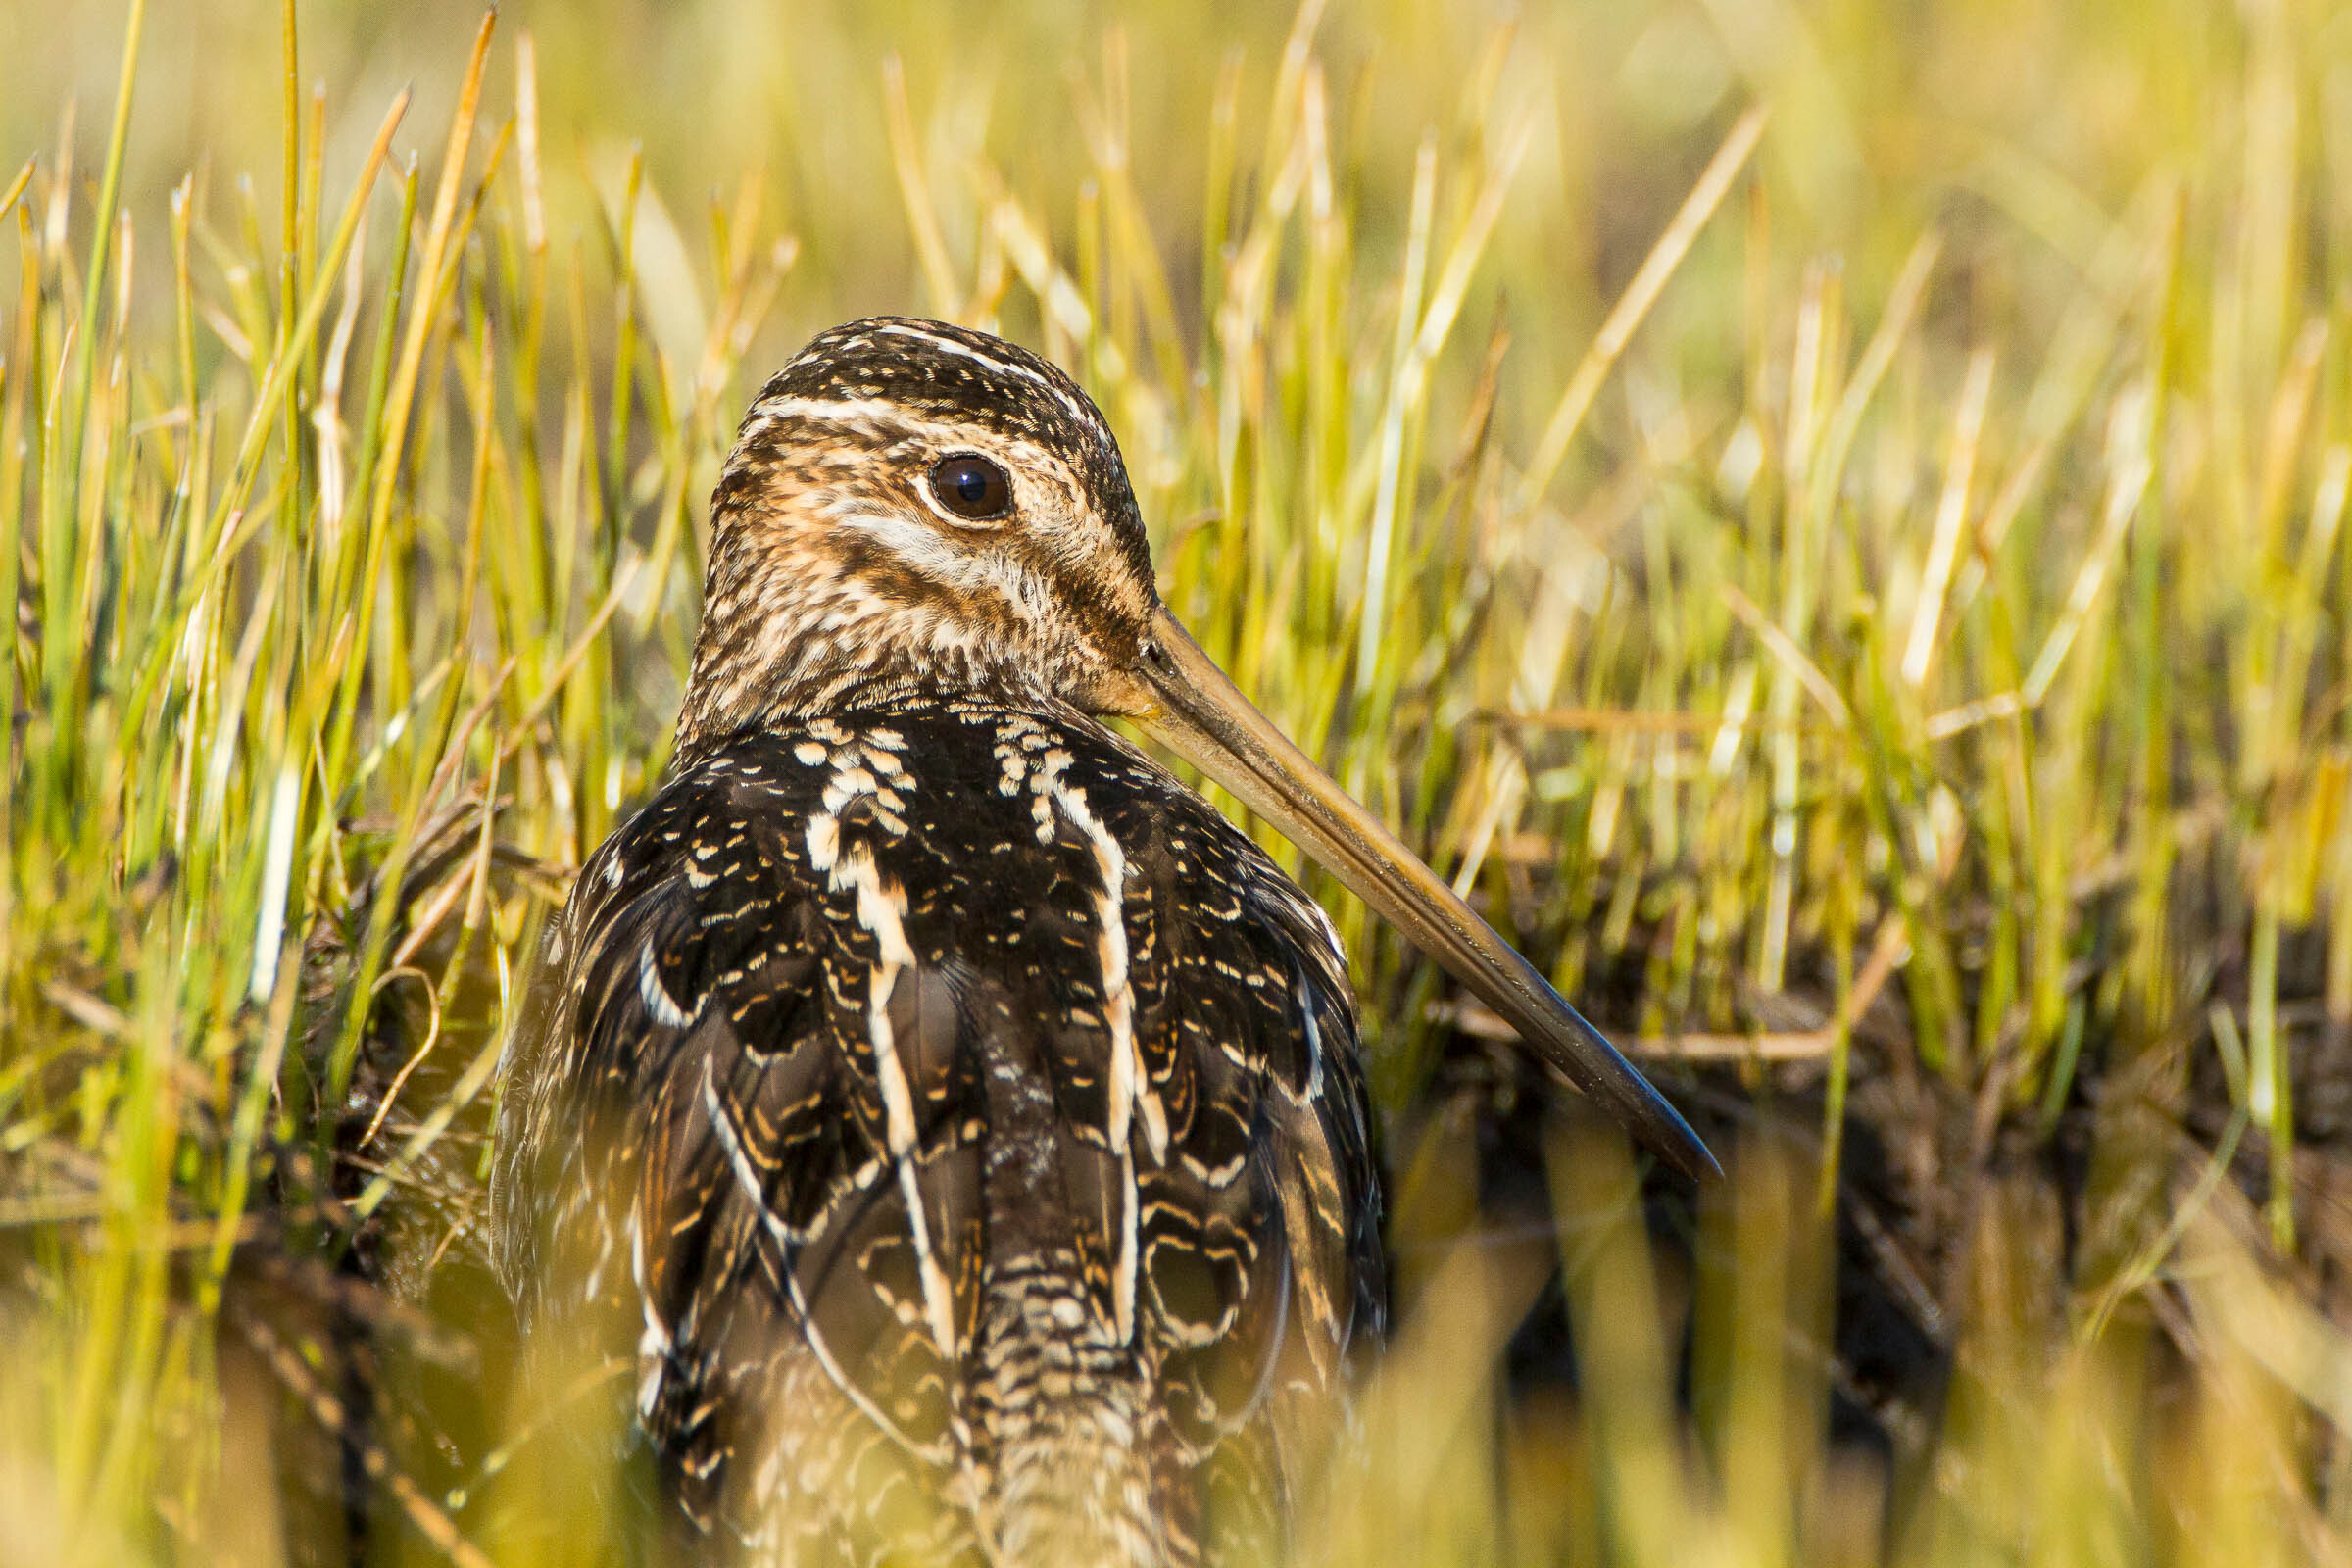 If you search carefully at Goethal's Pond, you just may spy the elusive Wilson's Snipe. Photo: Dorian Anderson/Audubon Photography Awards